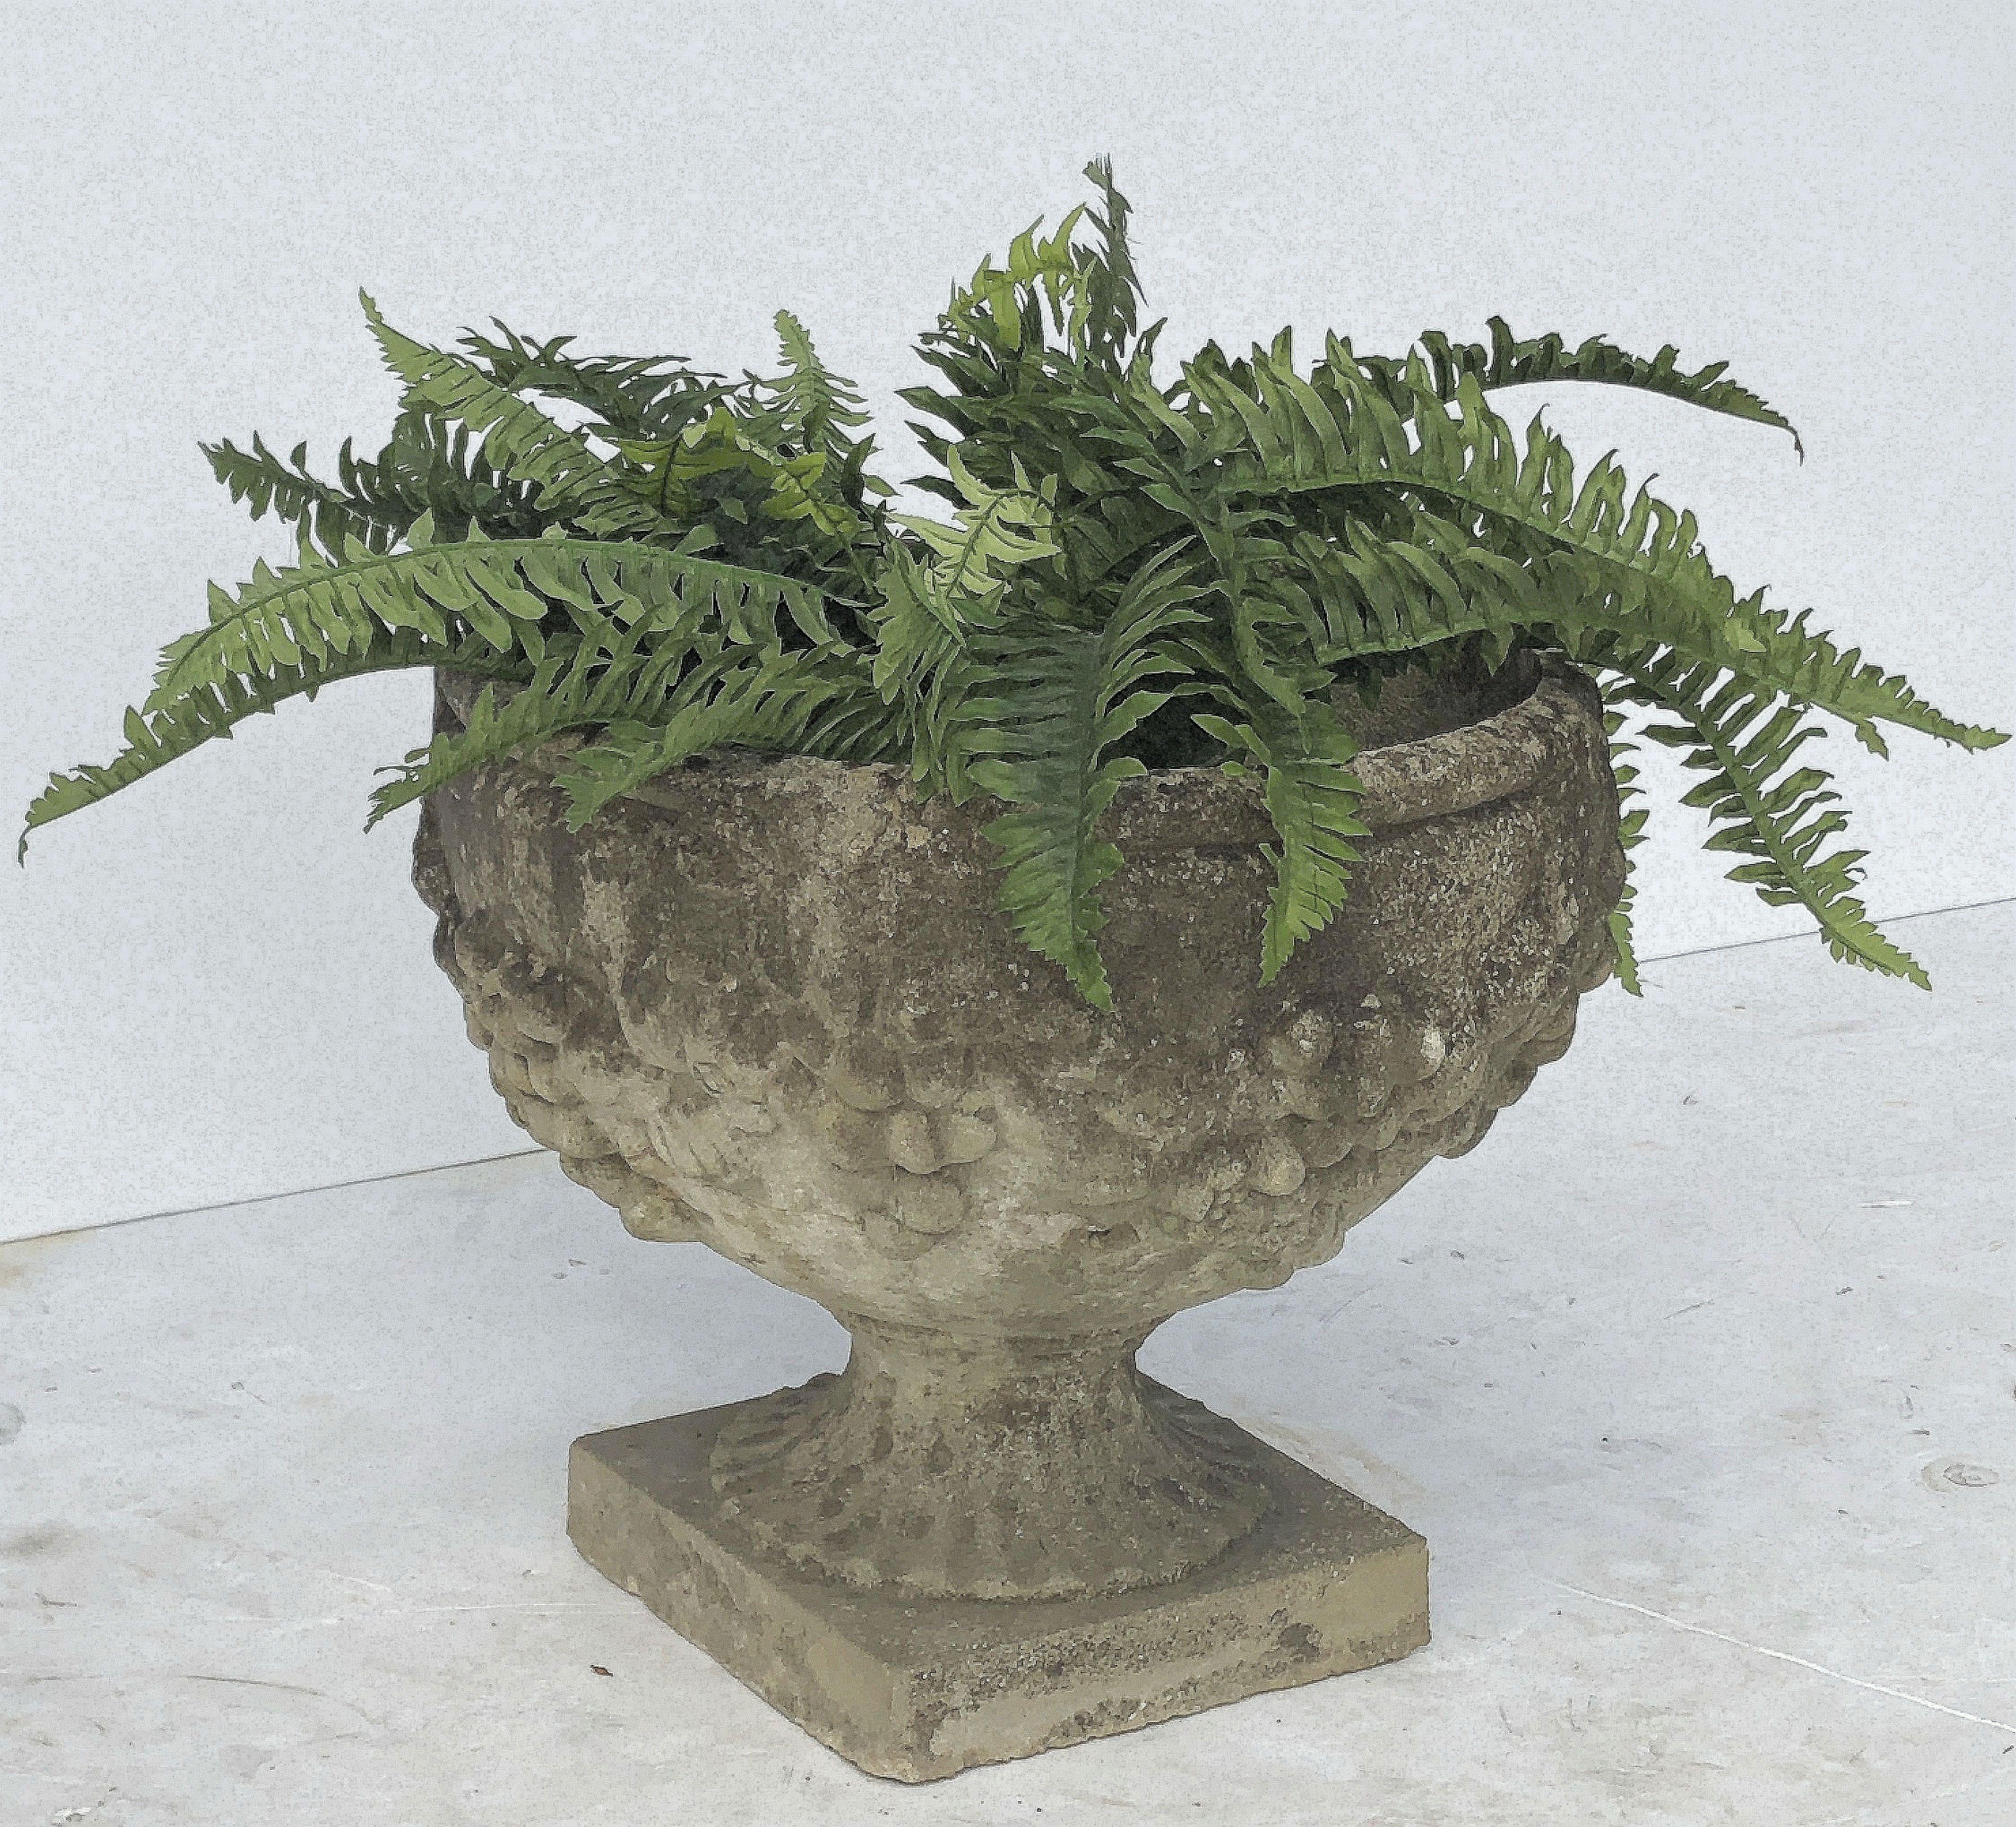 20th Century English Garden Stone Planter or Urn with Relief of Grapes